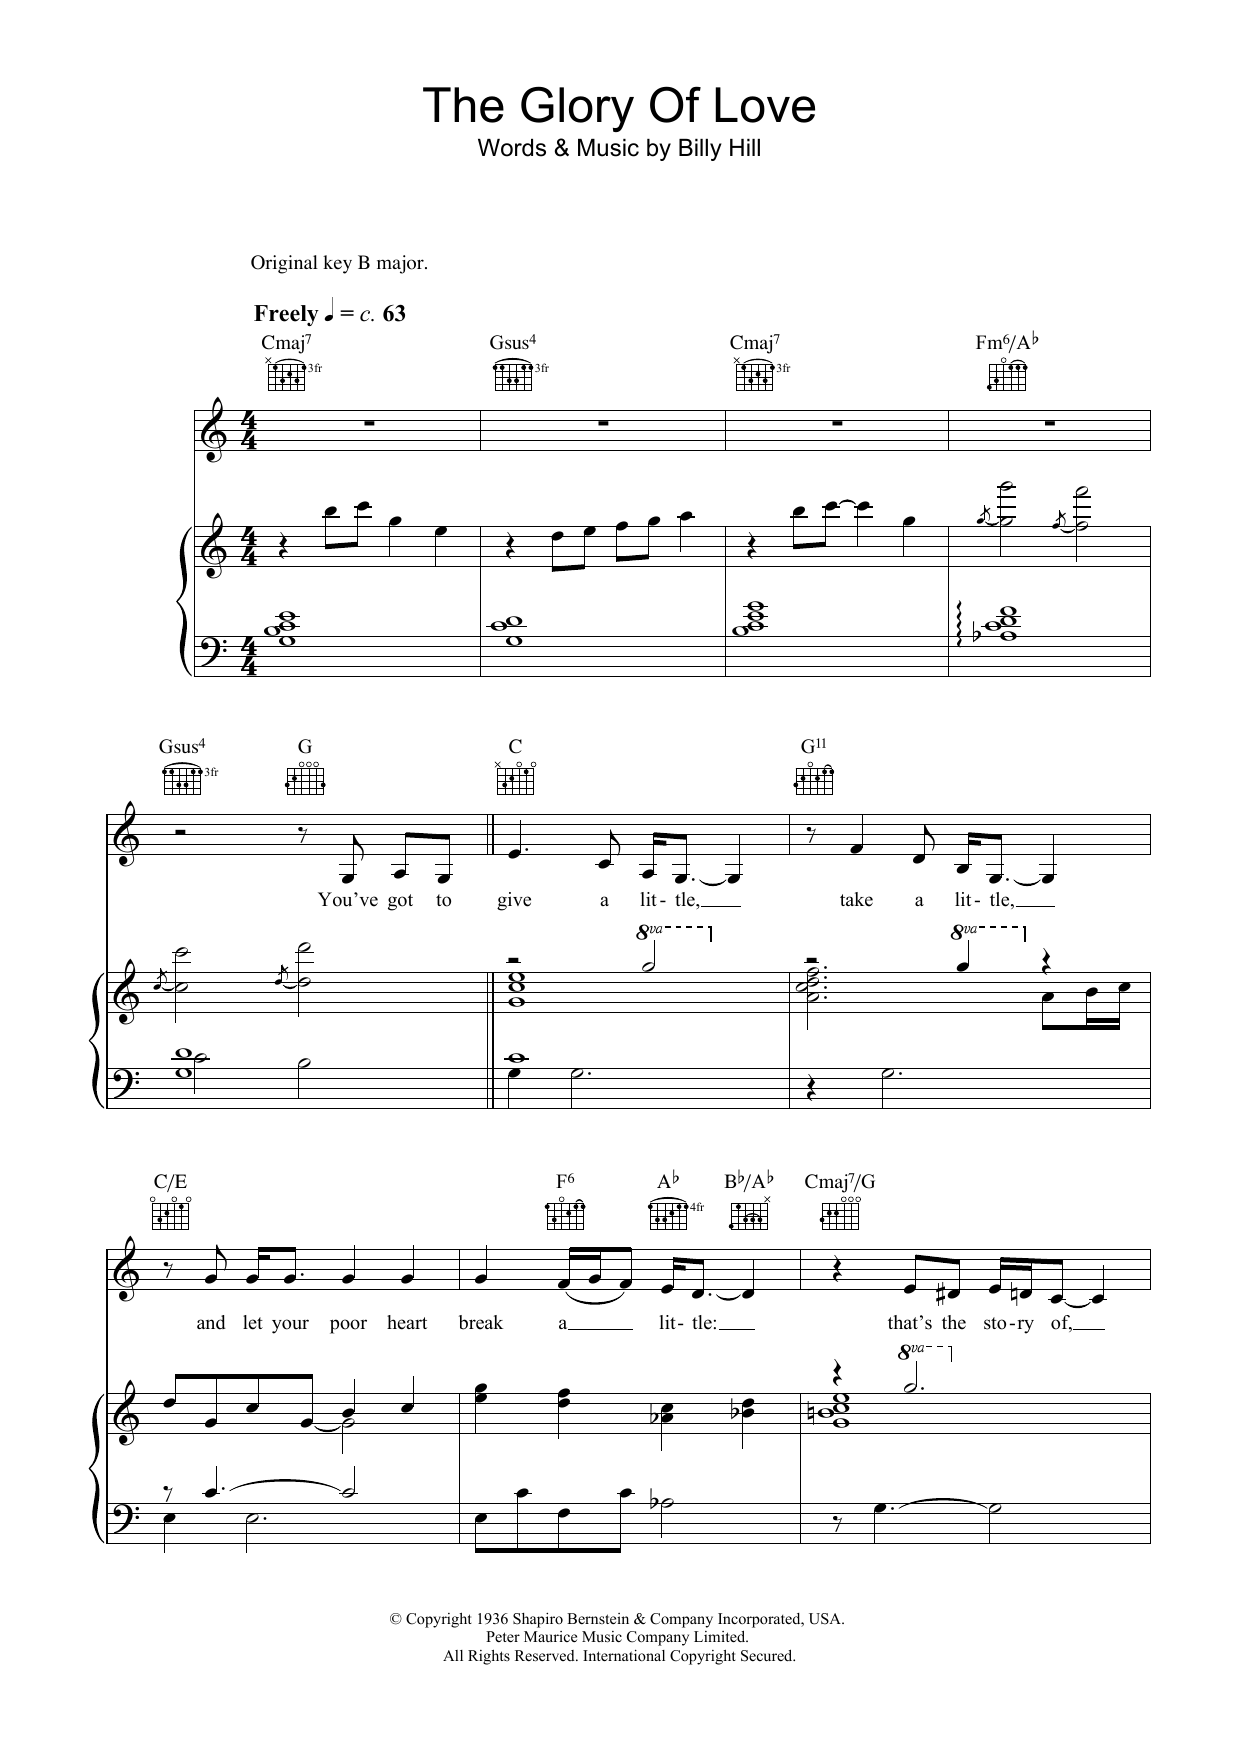 Bette Midler The Glory Of Love sheet music notes and chords. Download Printable PDF.